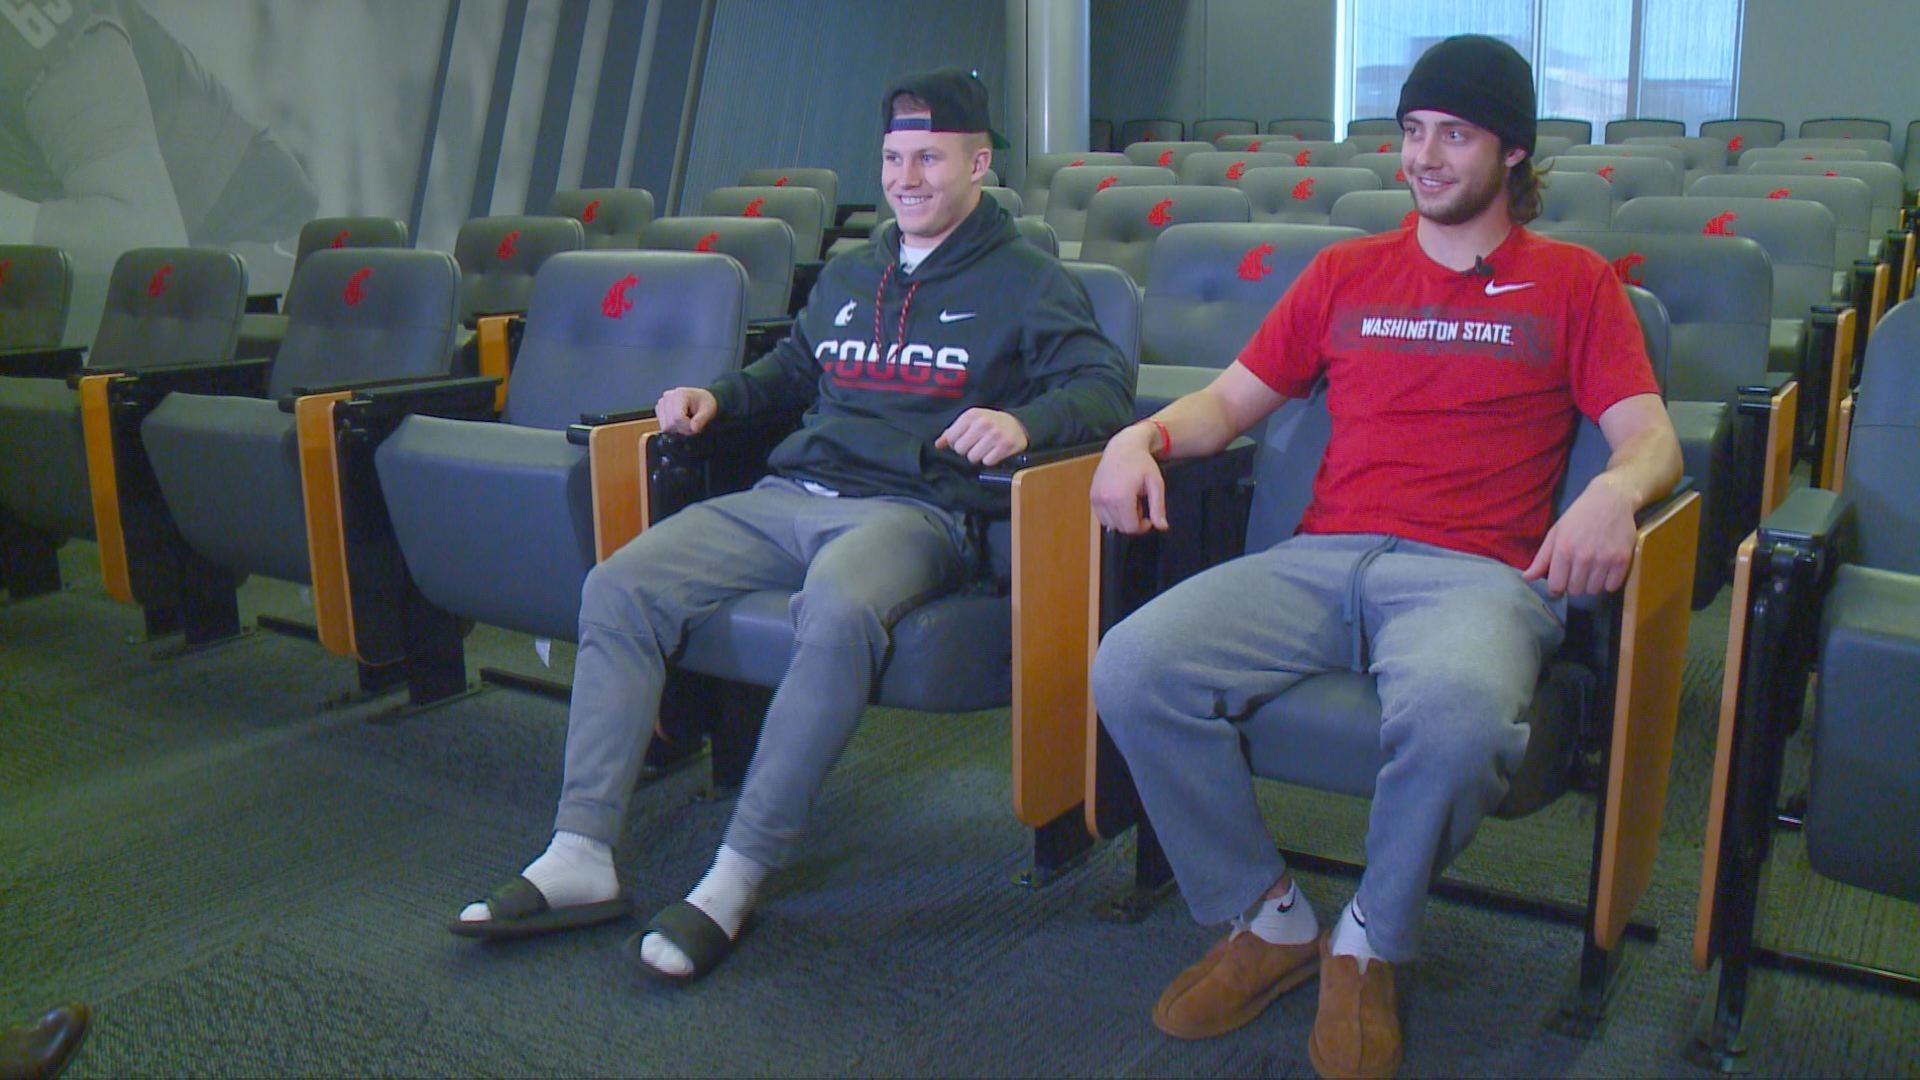 Washington State University QB Anthony Gordon and RB Max Borghi sat down with Brenna Greene to discuss being teammates and living together as roommates.